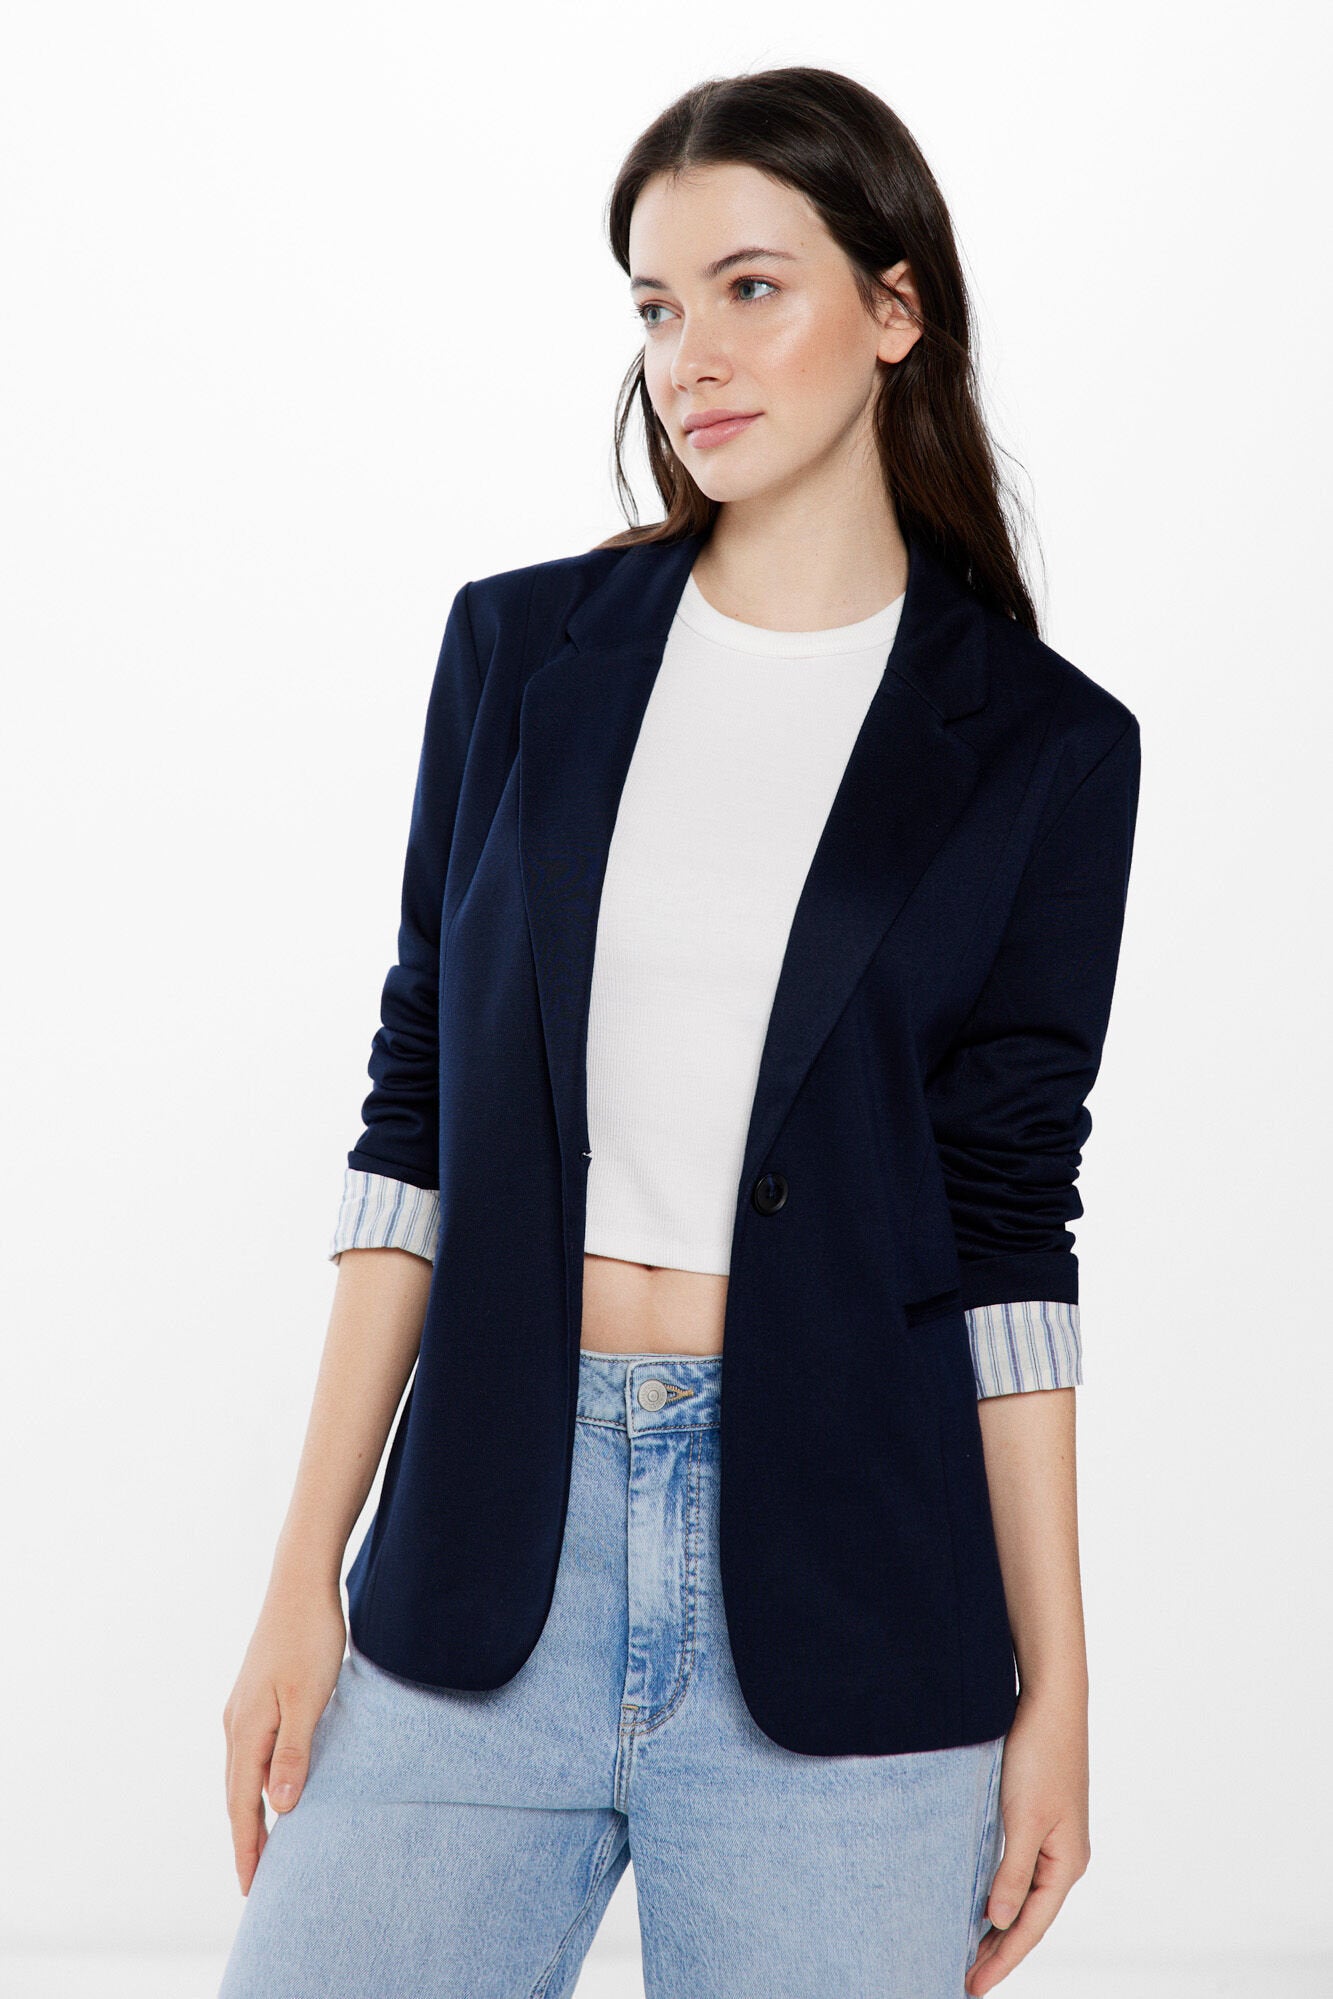 Blazer With Rolled Sleeves_8417373_14_06